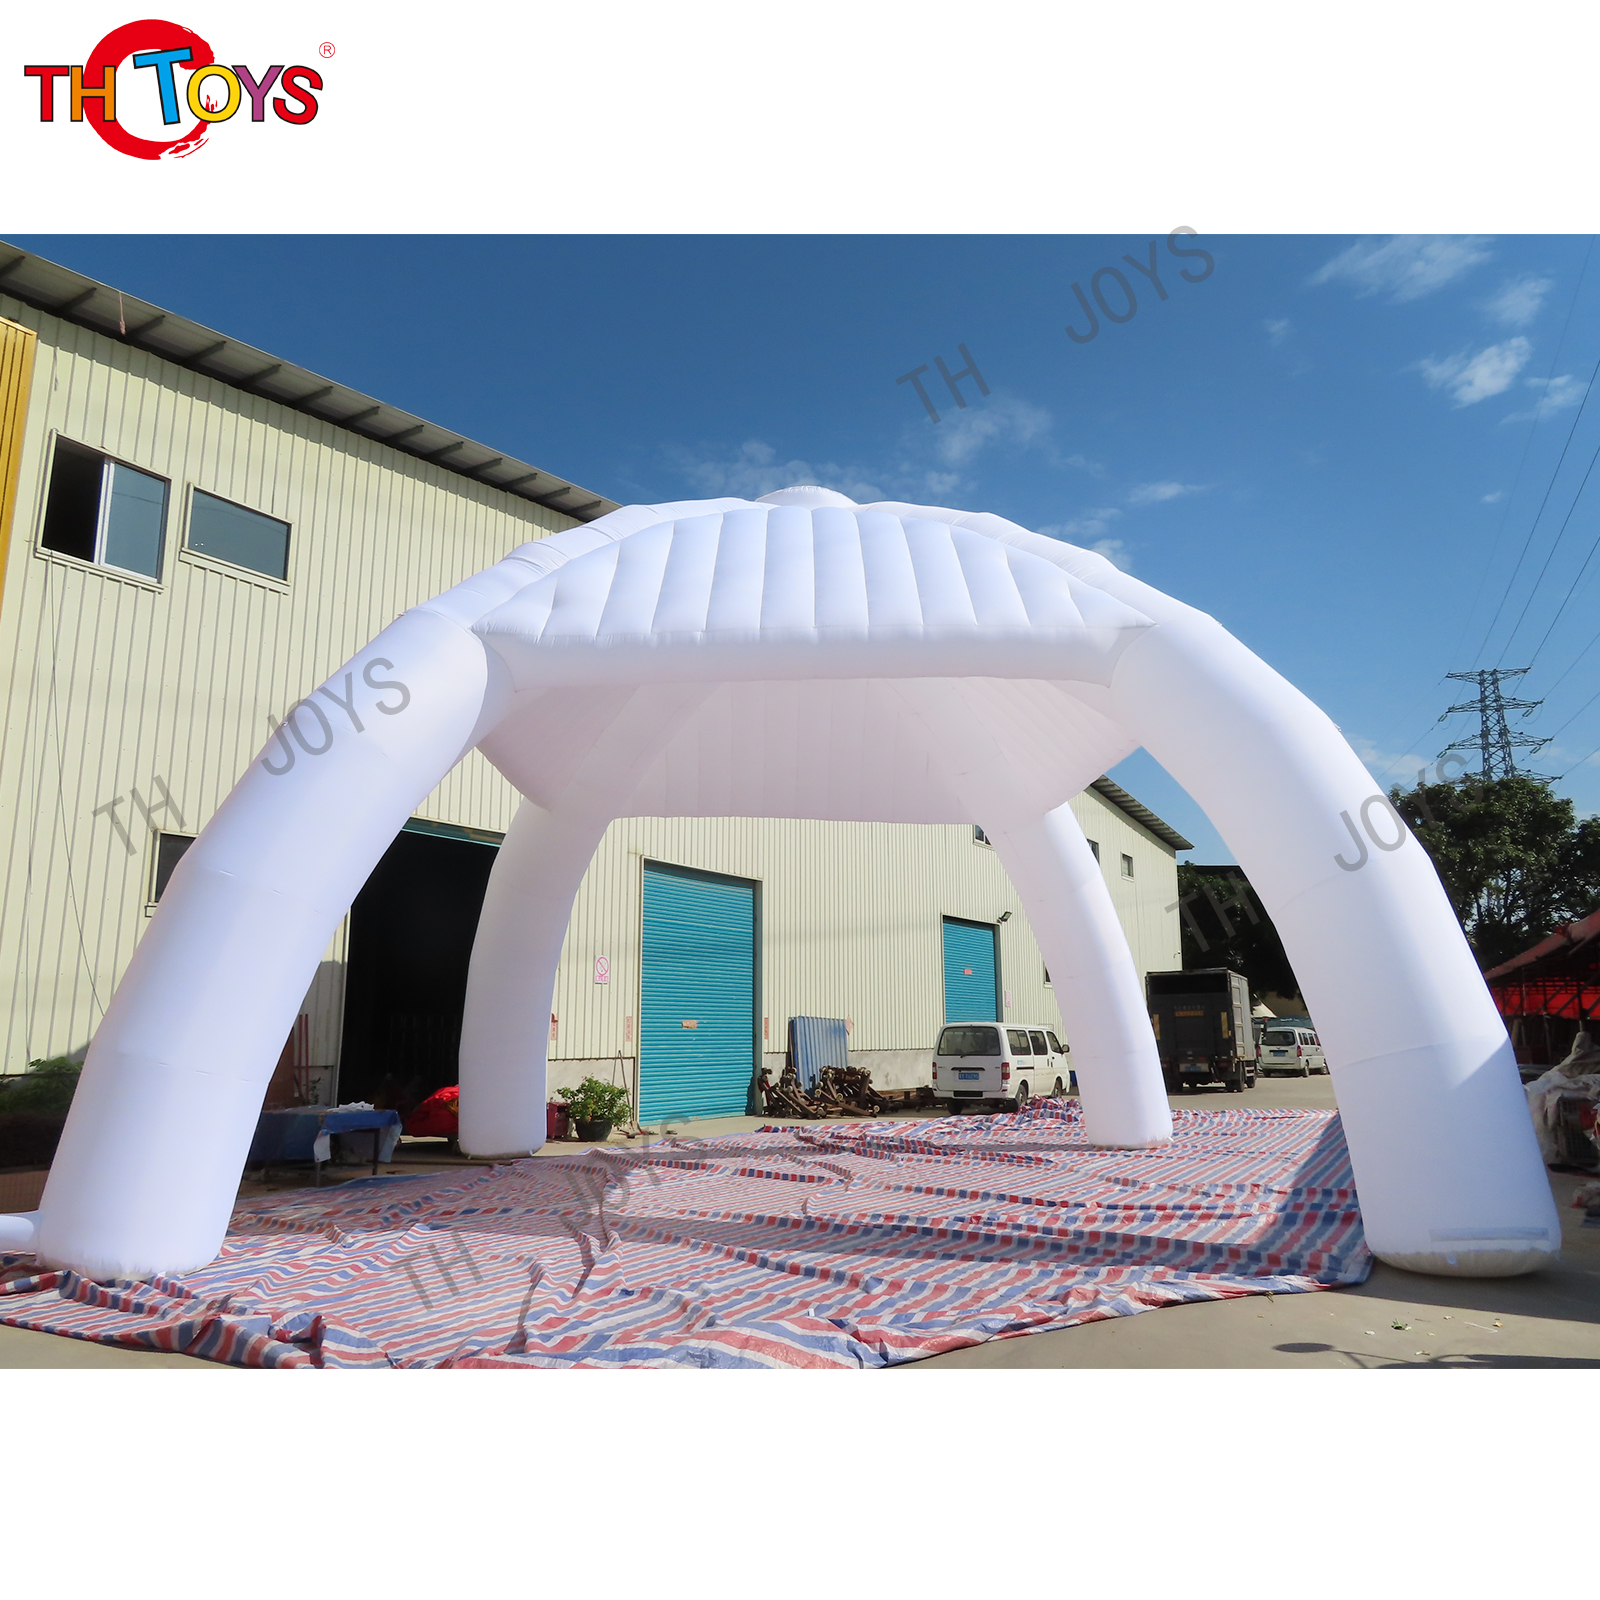 Inflatable spider tents05